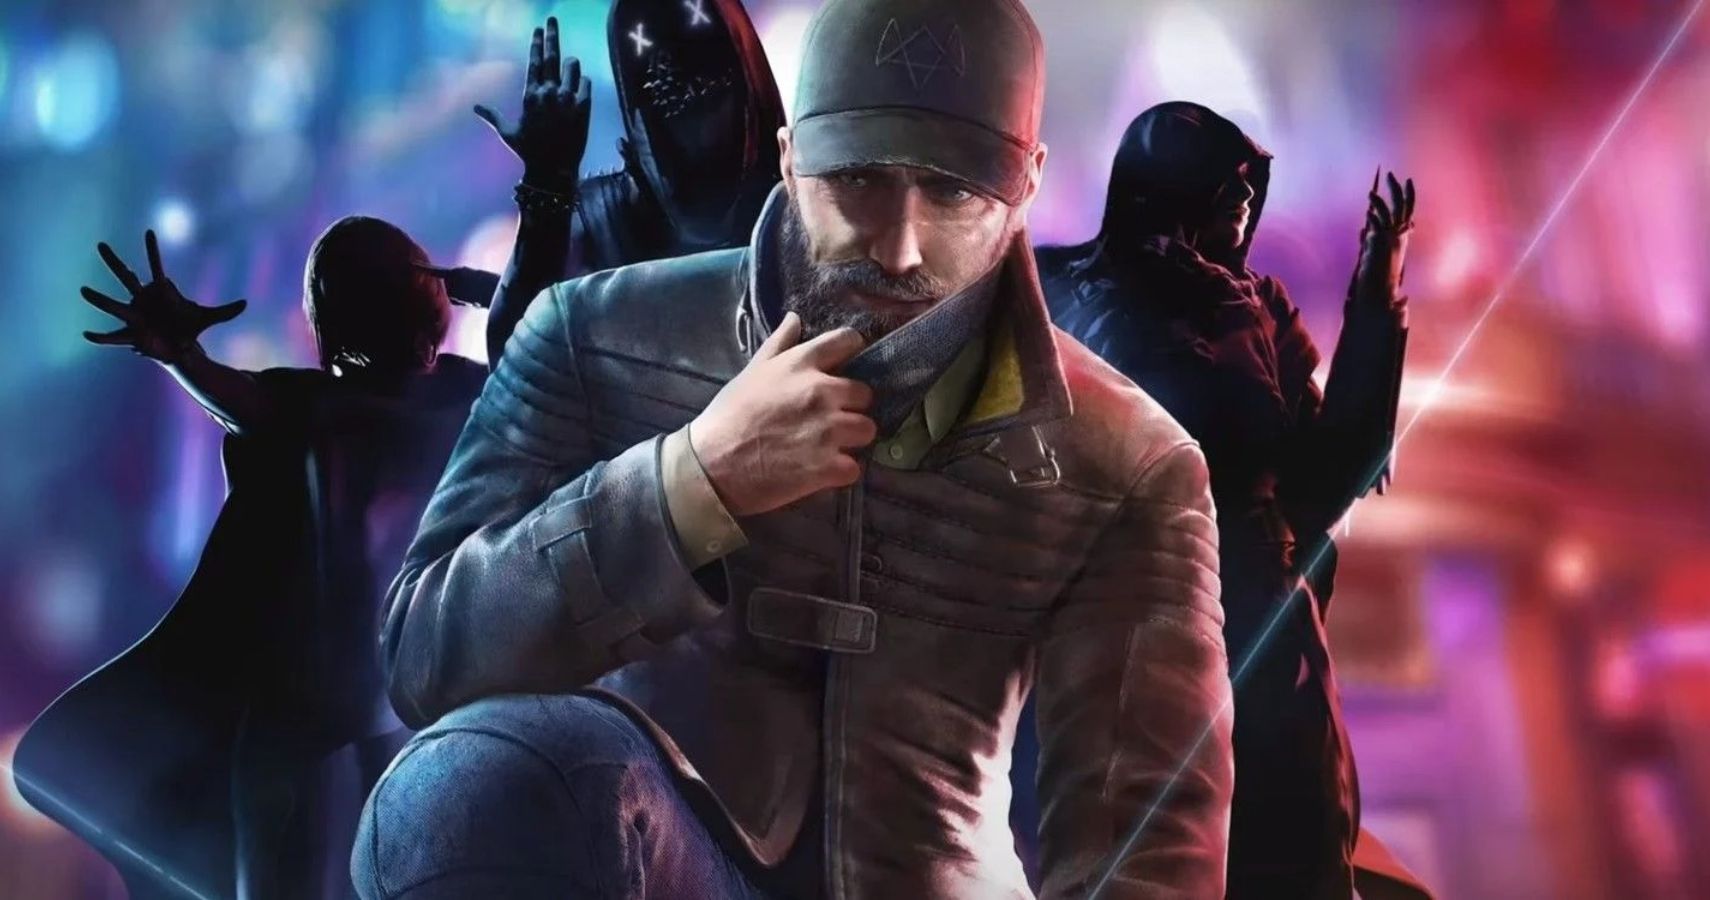 Watch Dogs: Legion -- Bloodline is next expansion for cyberhacker series